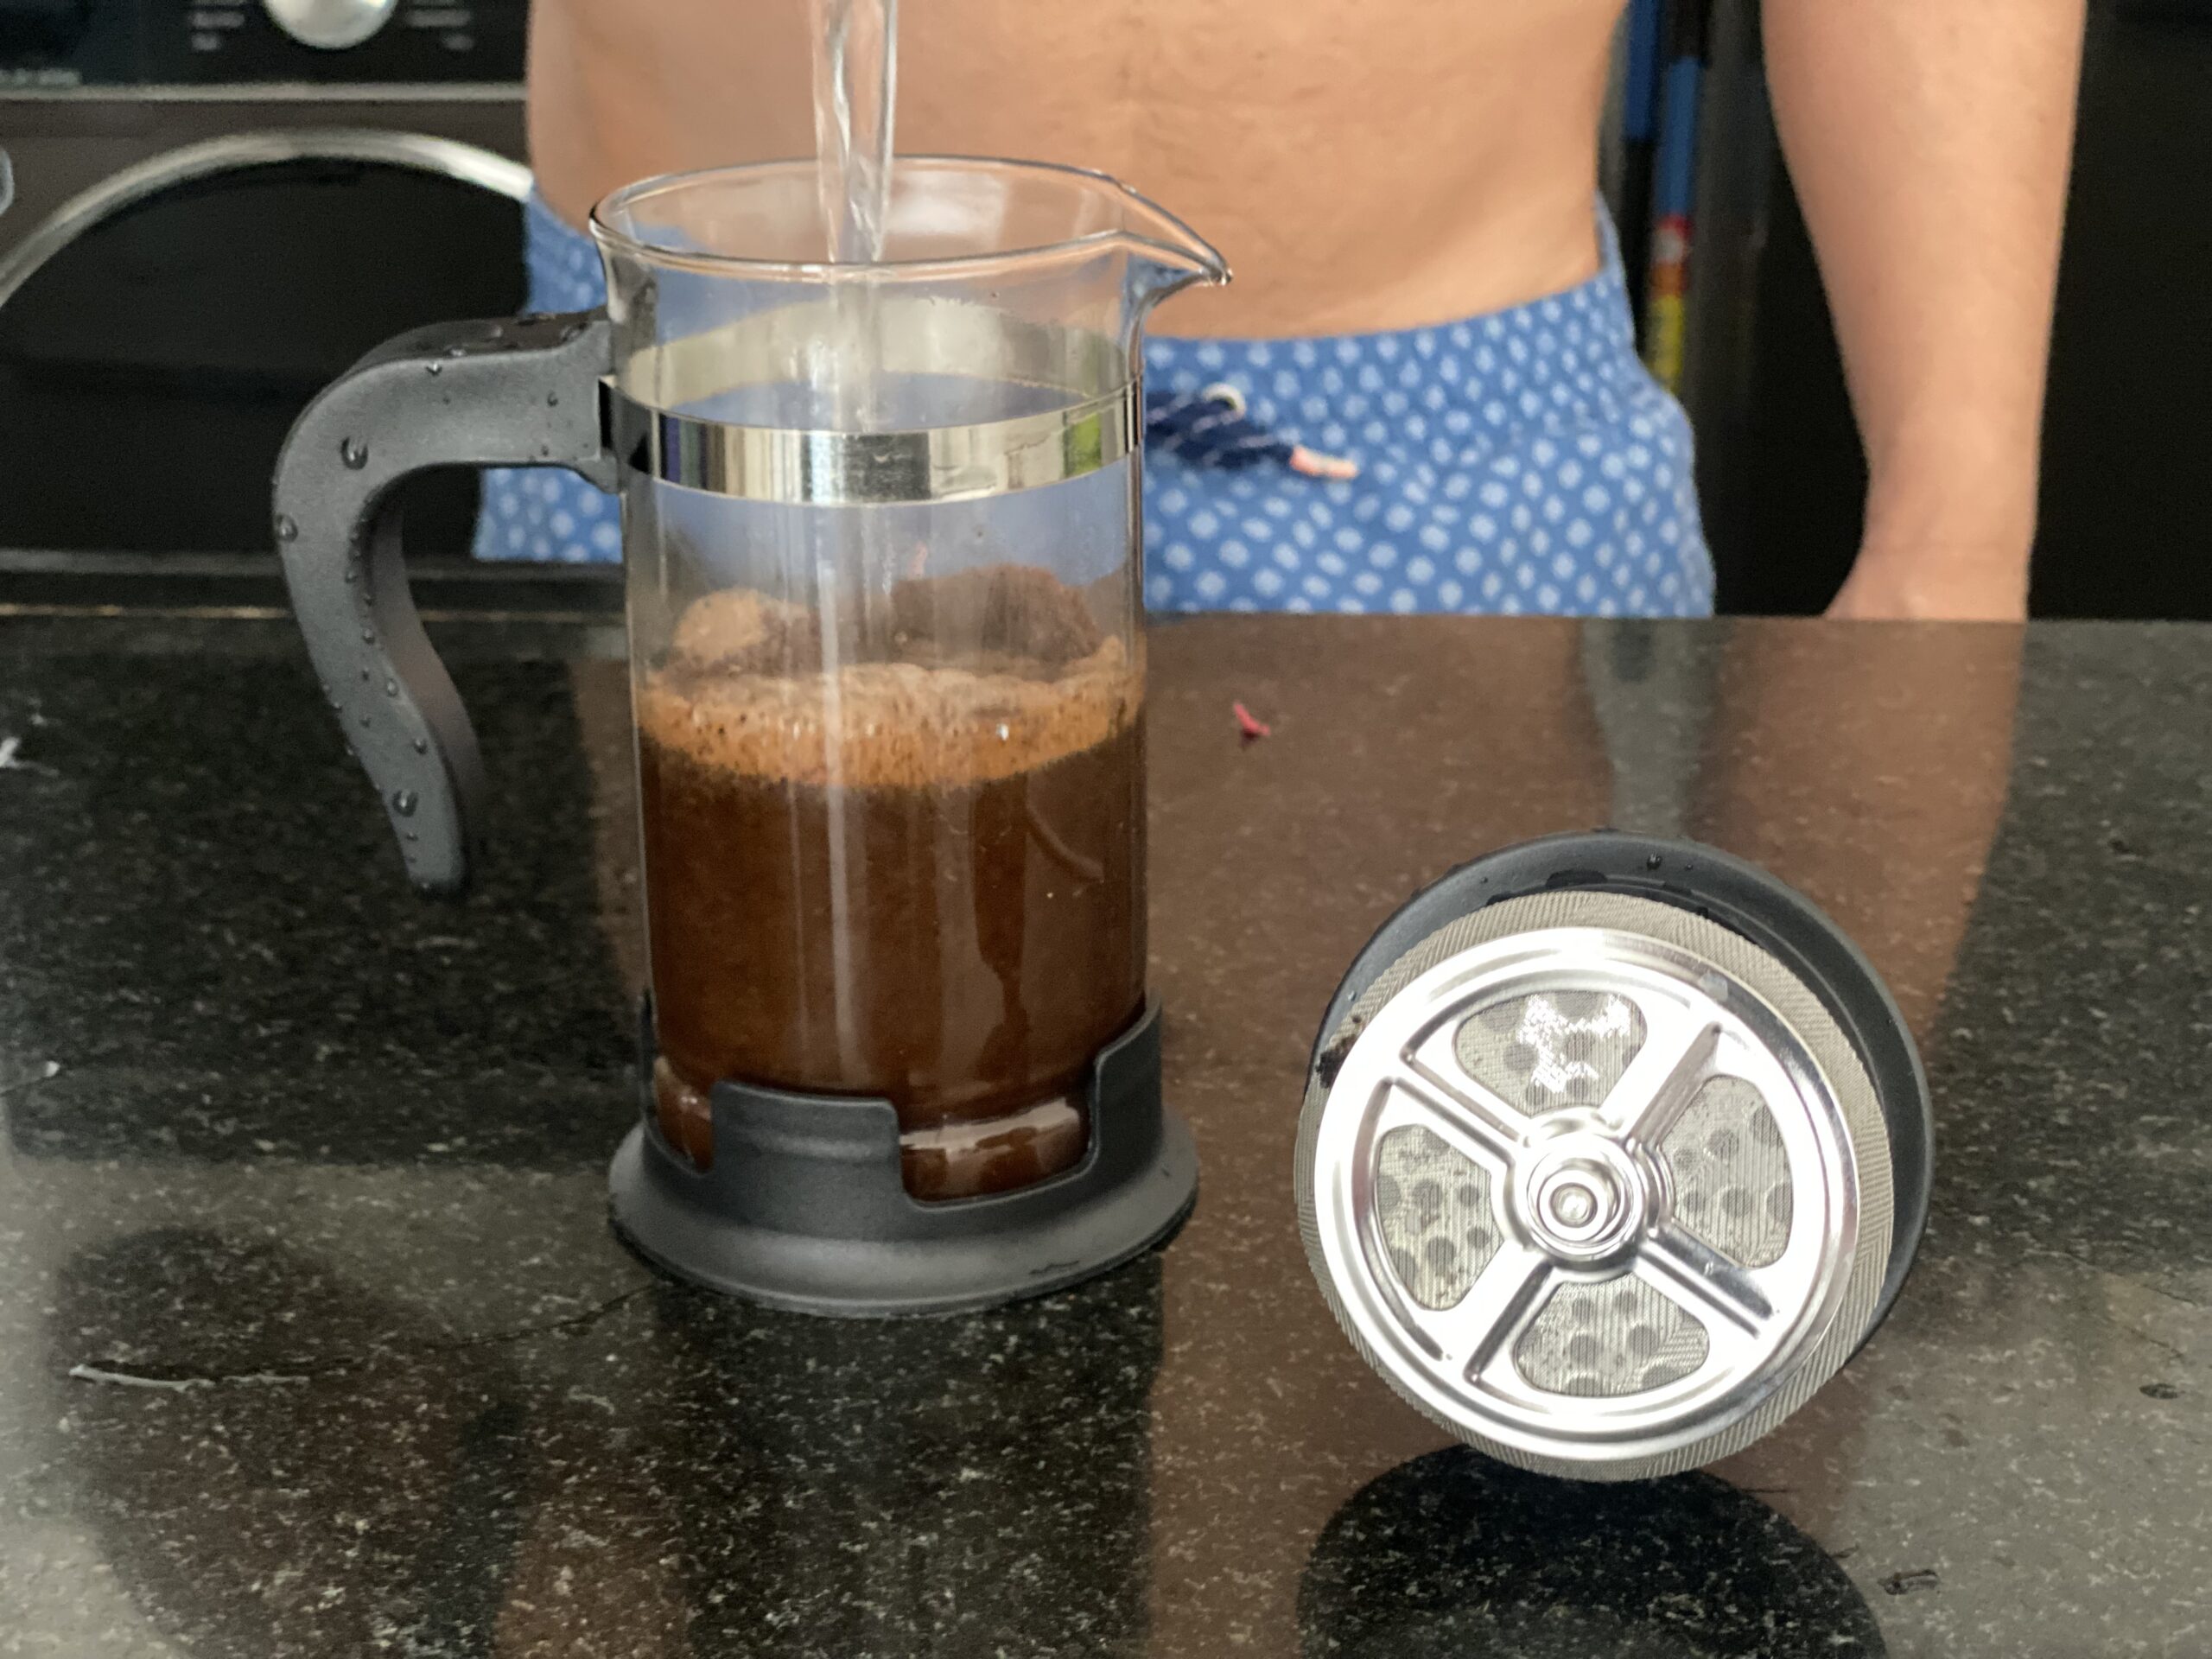 Hot Water into French Press